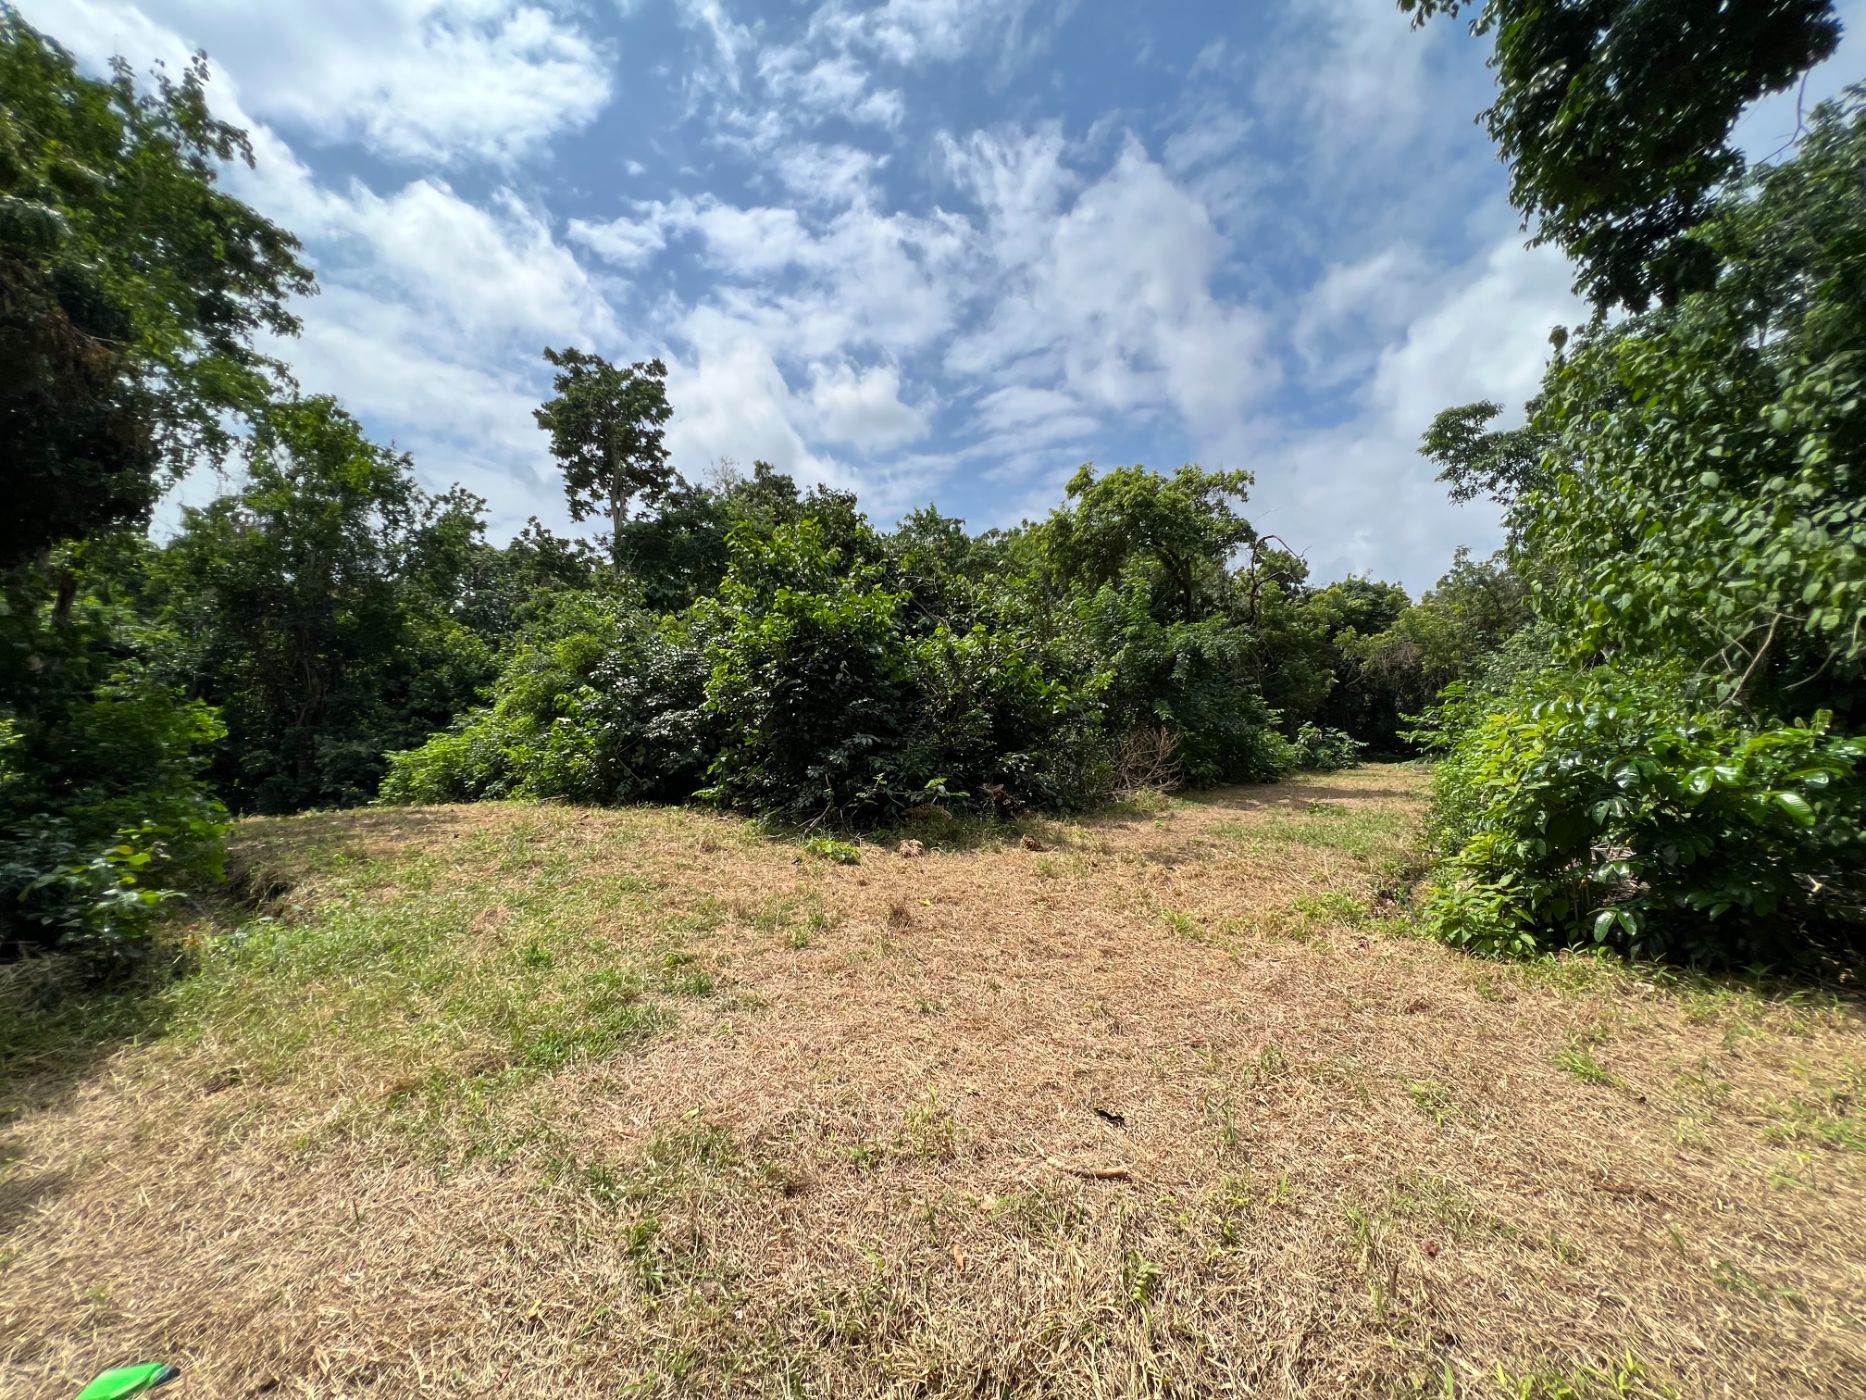 0.34 acres residential vacant land for sale in Diani (Kenya)